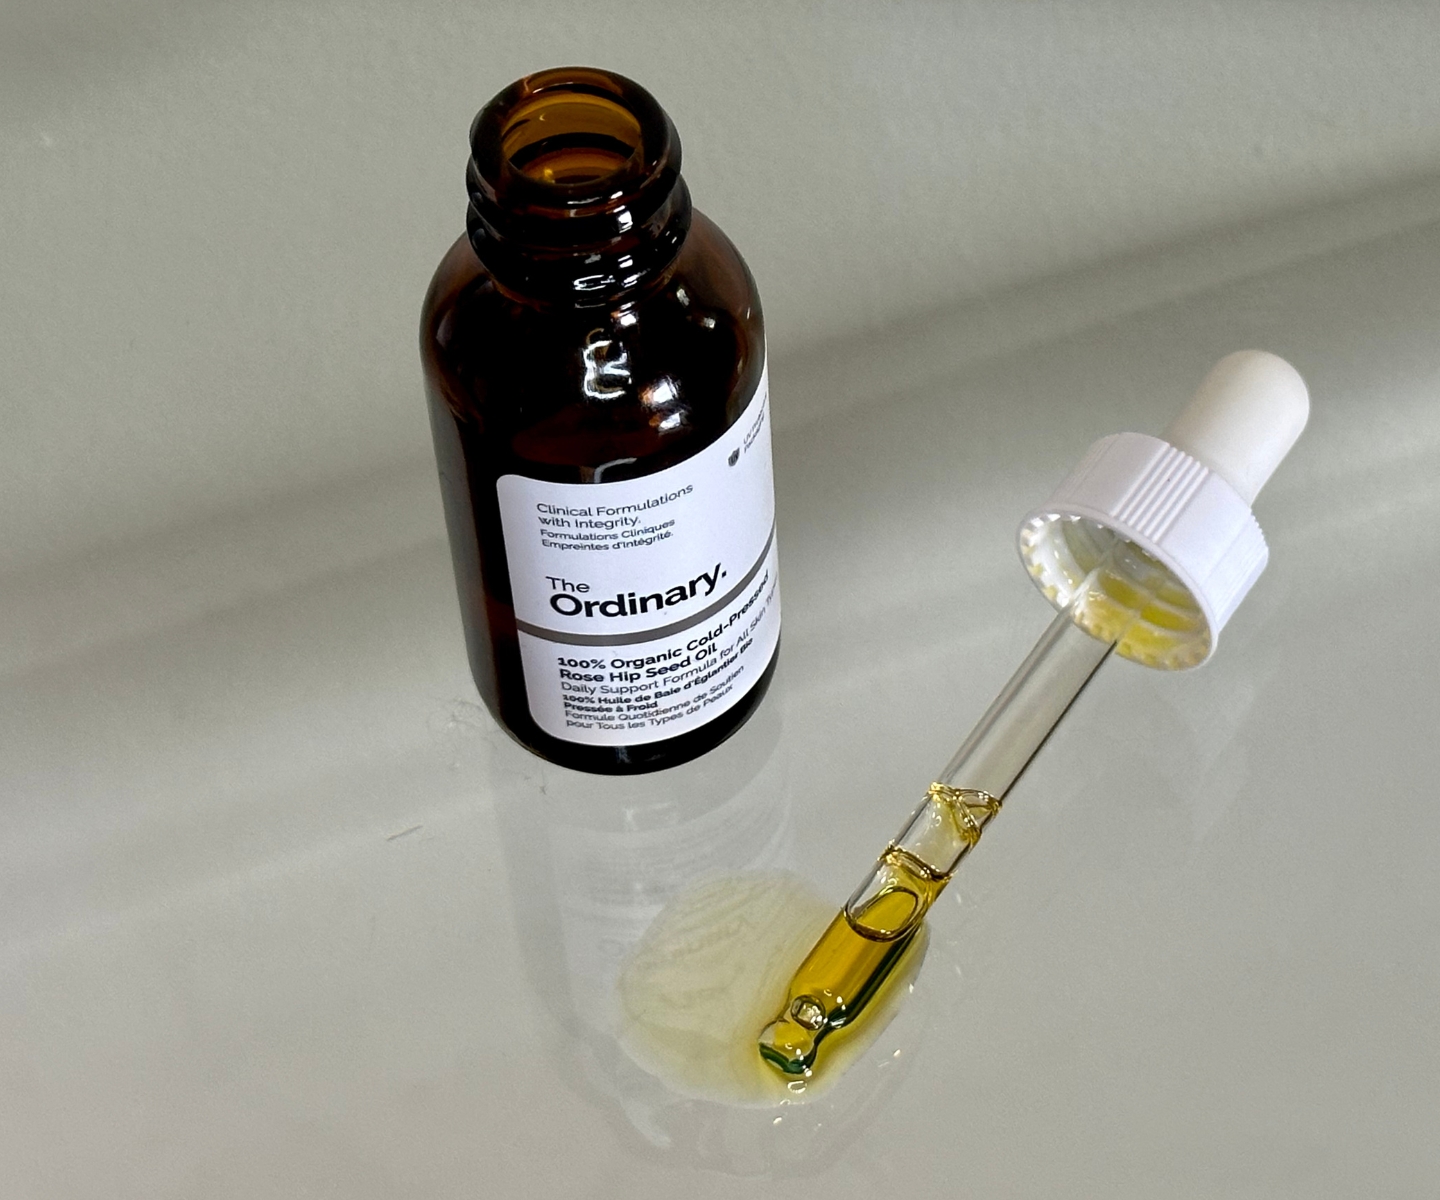 The Ordinary Cold-Pressed Rose Hip Oil product texture